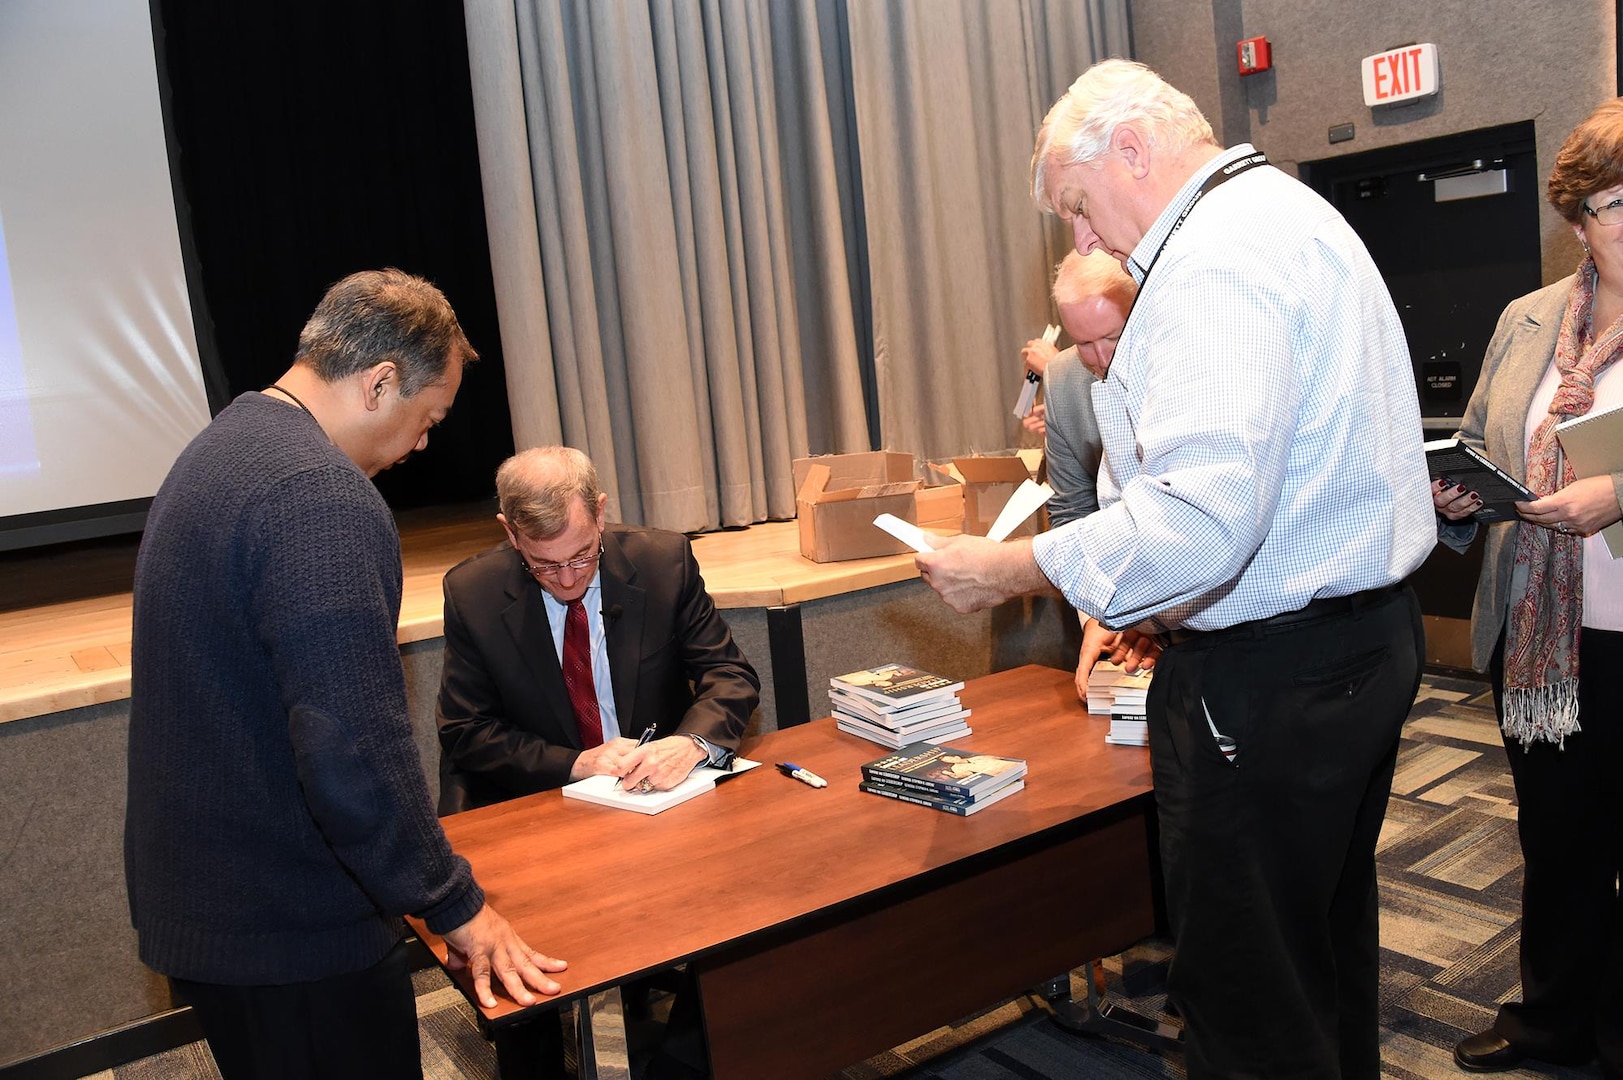 Retired U.S. Air Force Gen. Stephen Lorenz signs copies of his book, titled Lorenz on Leadership, after his presentation to members of U.S. Strategic Command at Offutt Air Force Base, Neb., Nov. 6, 2017. Lorenz, who retired as commander of Air Education and Training Command, discussed the traits and practices of effective leaders based on his experience as a military officer and commander.